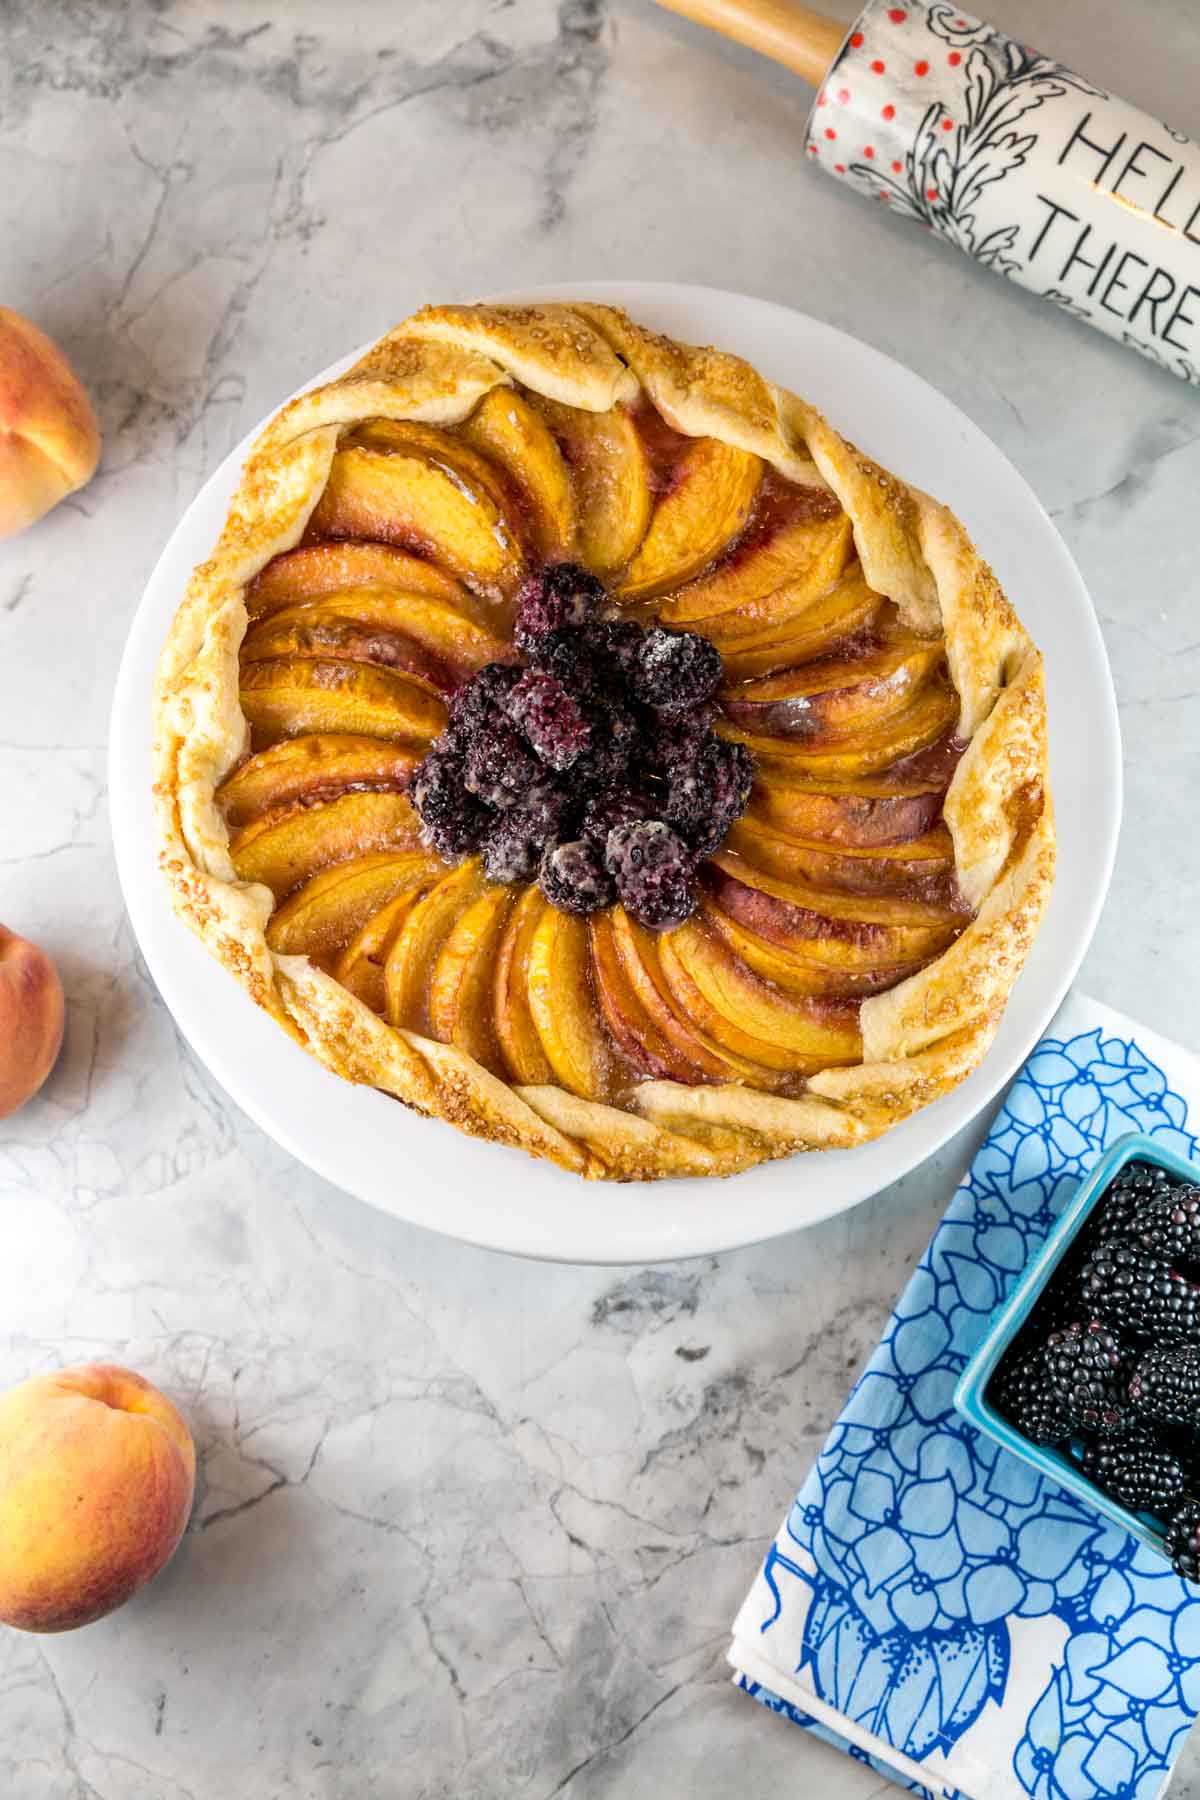 galette filled with blackberries and peaches on a dessert plate